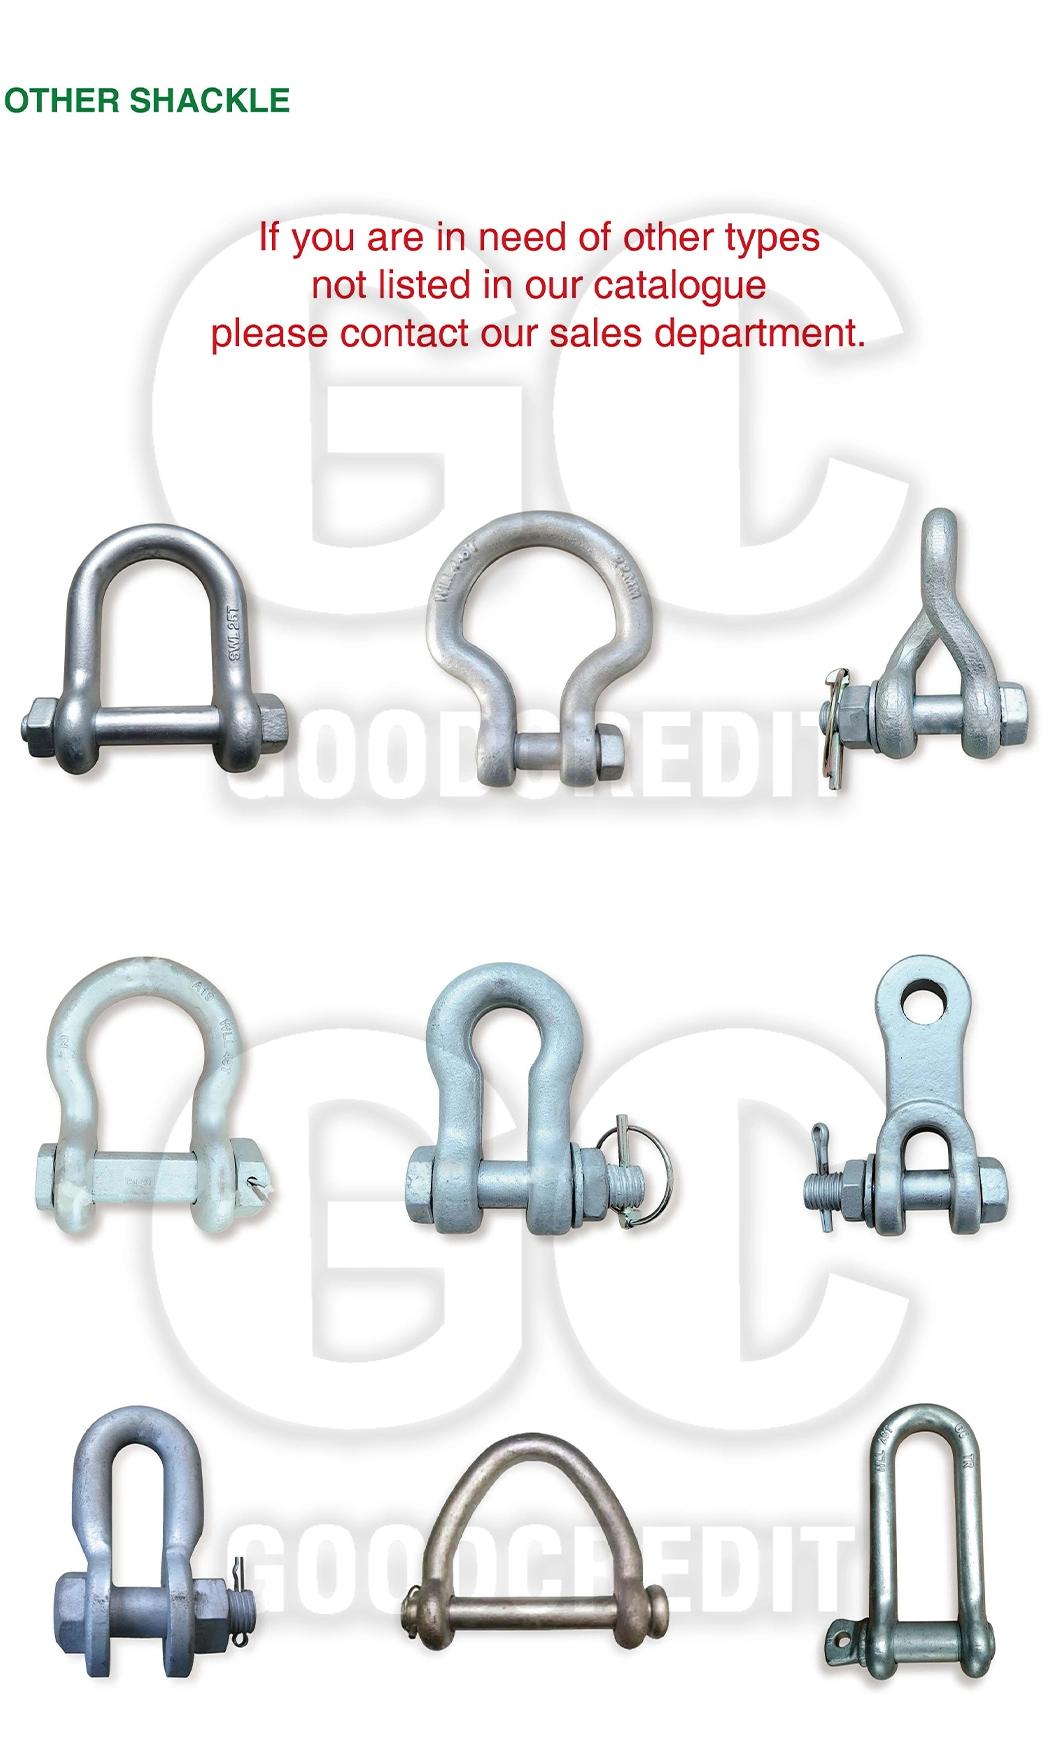 Galvanized 3/4" 4.75t G209 Anchor Shackle D Ring Bow Shackle